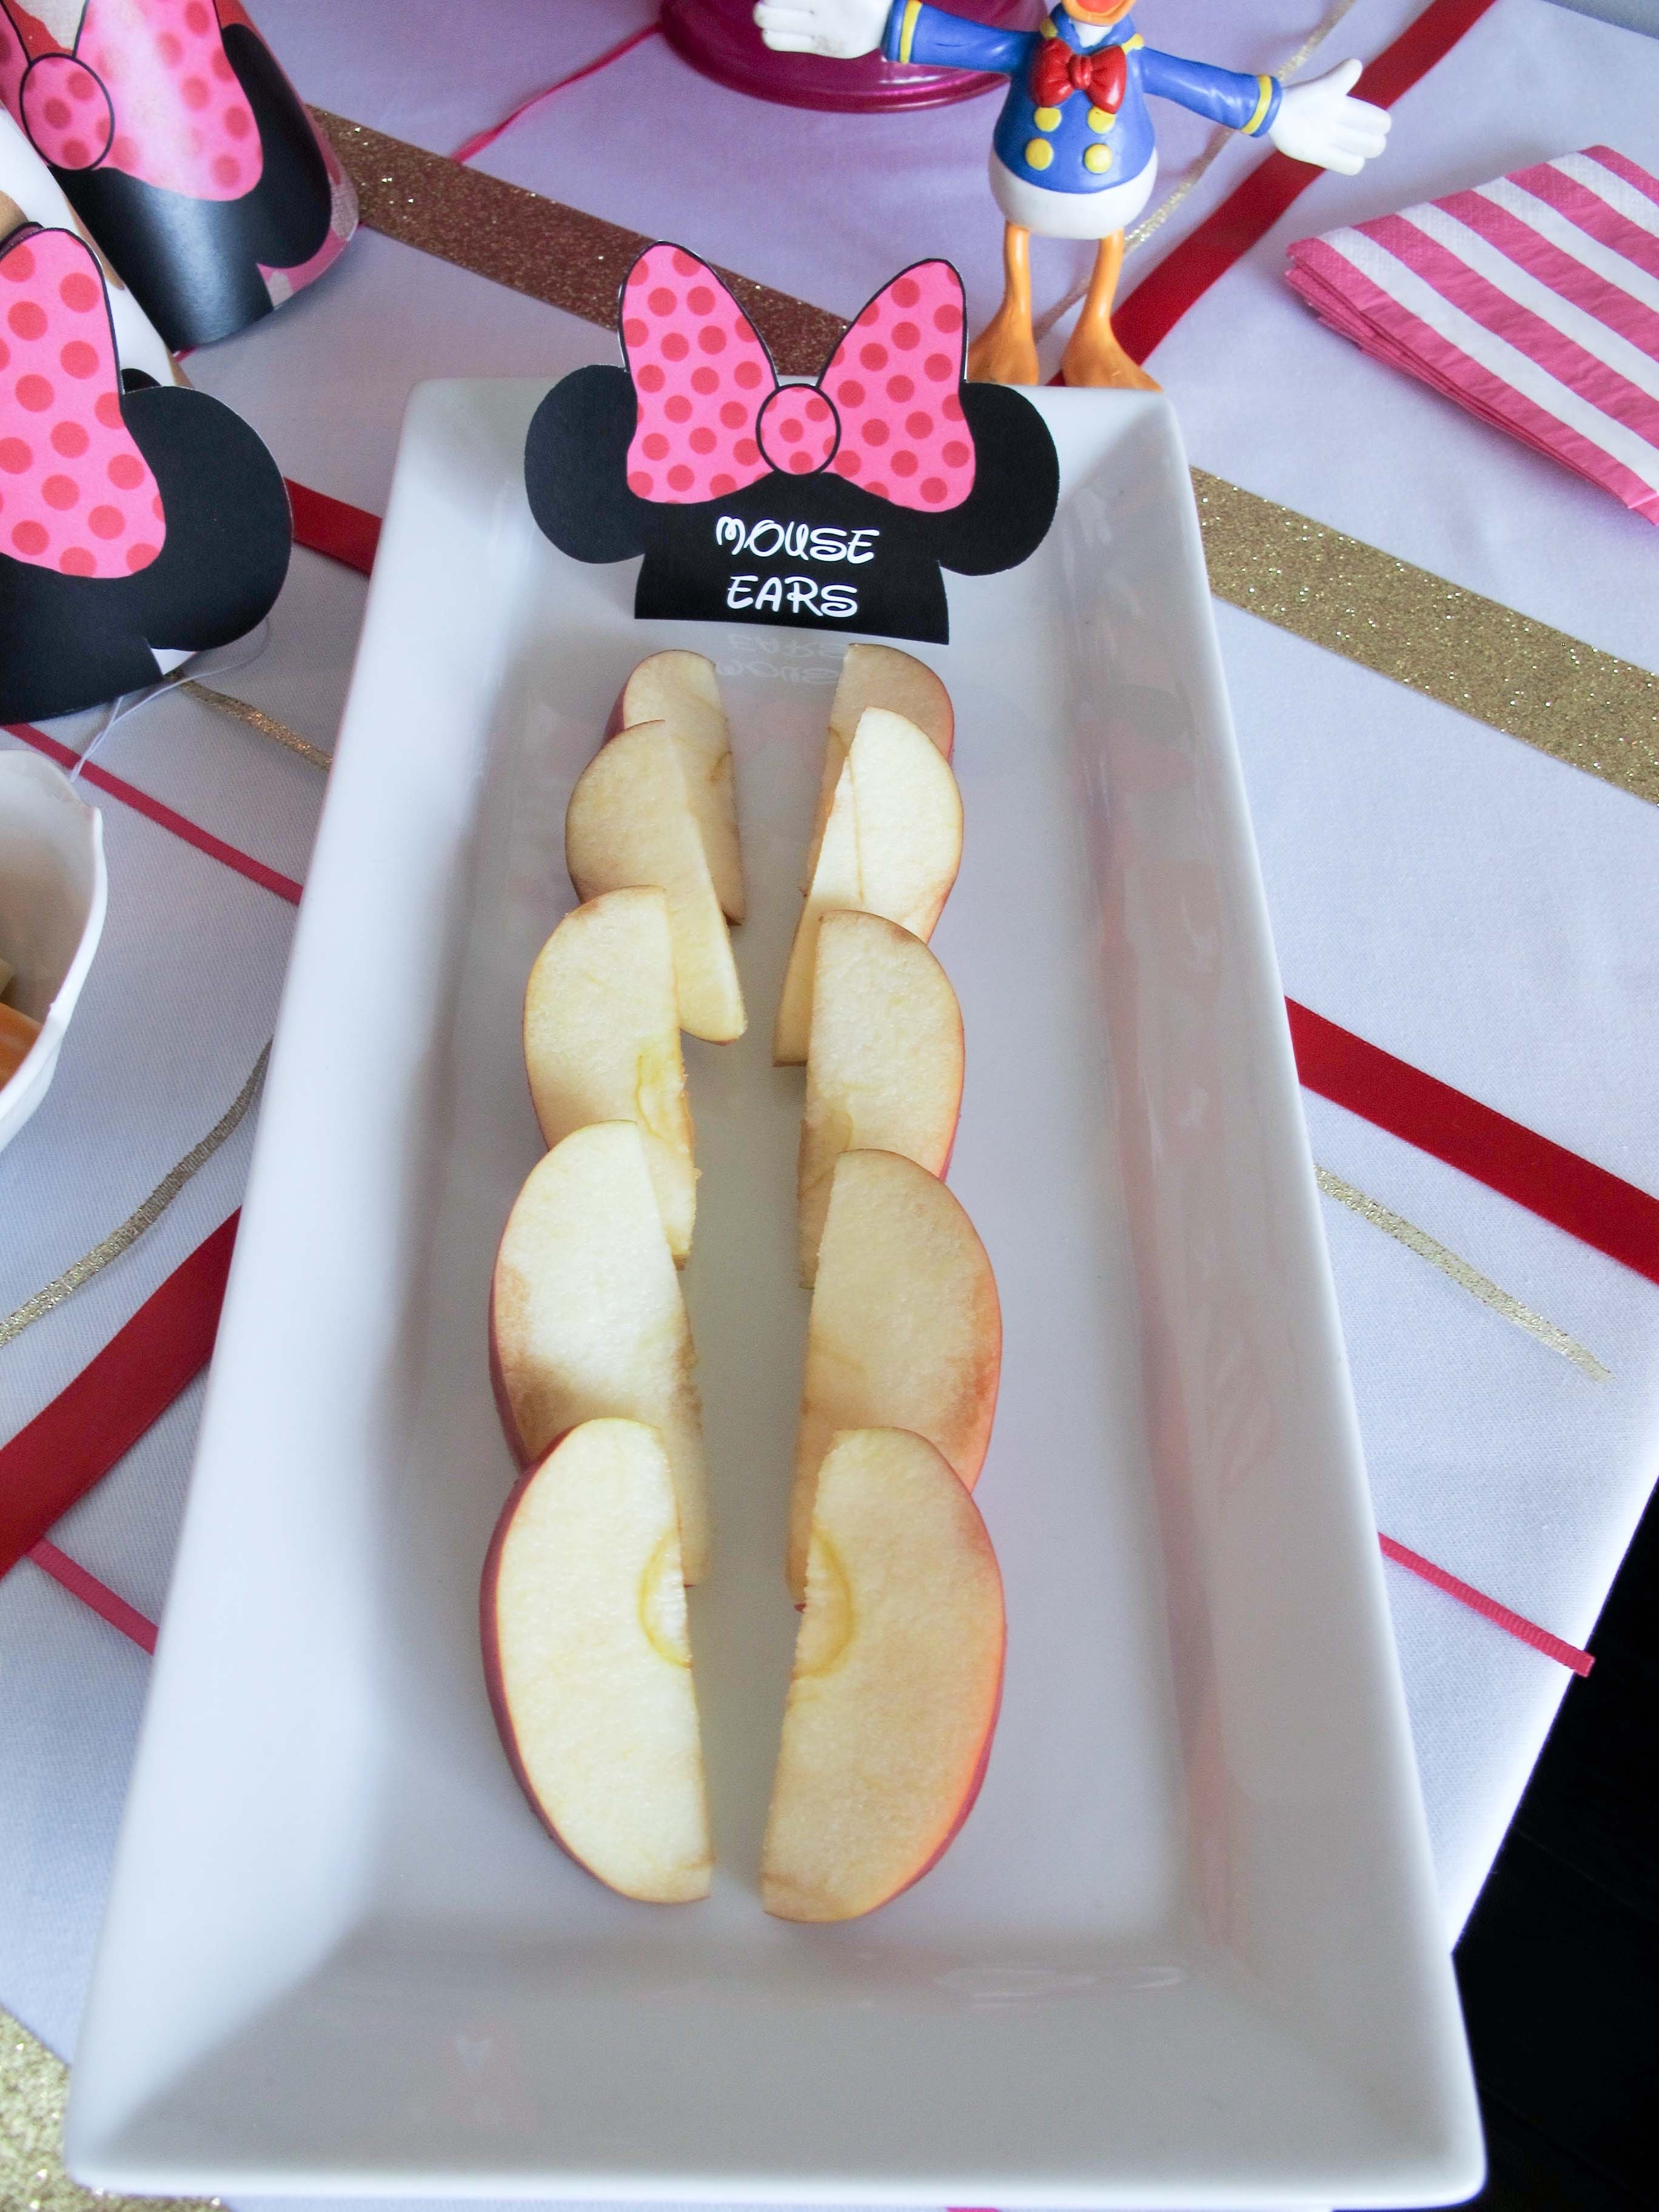 10 Fabulous Minnie Mouse Birthday Party Food Ideas minnie mouse birthday party ideas via elevencupcakes 11cupcakes 2022